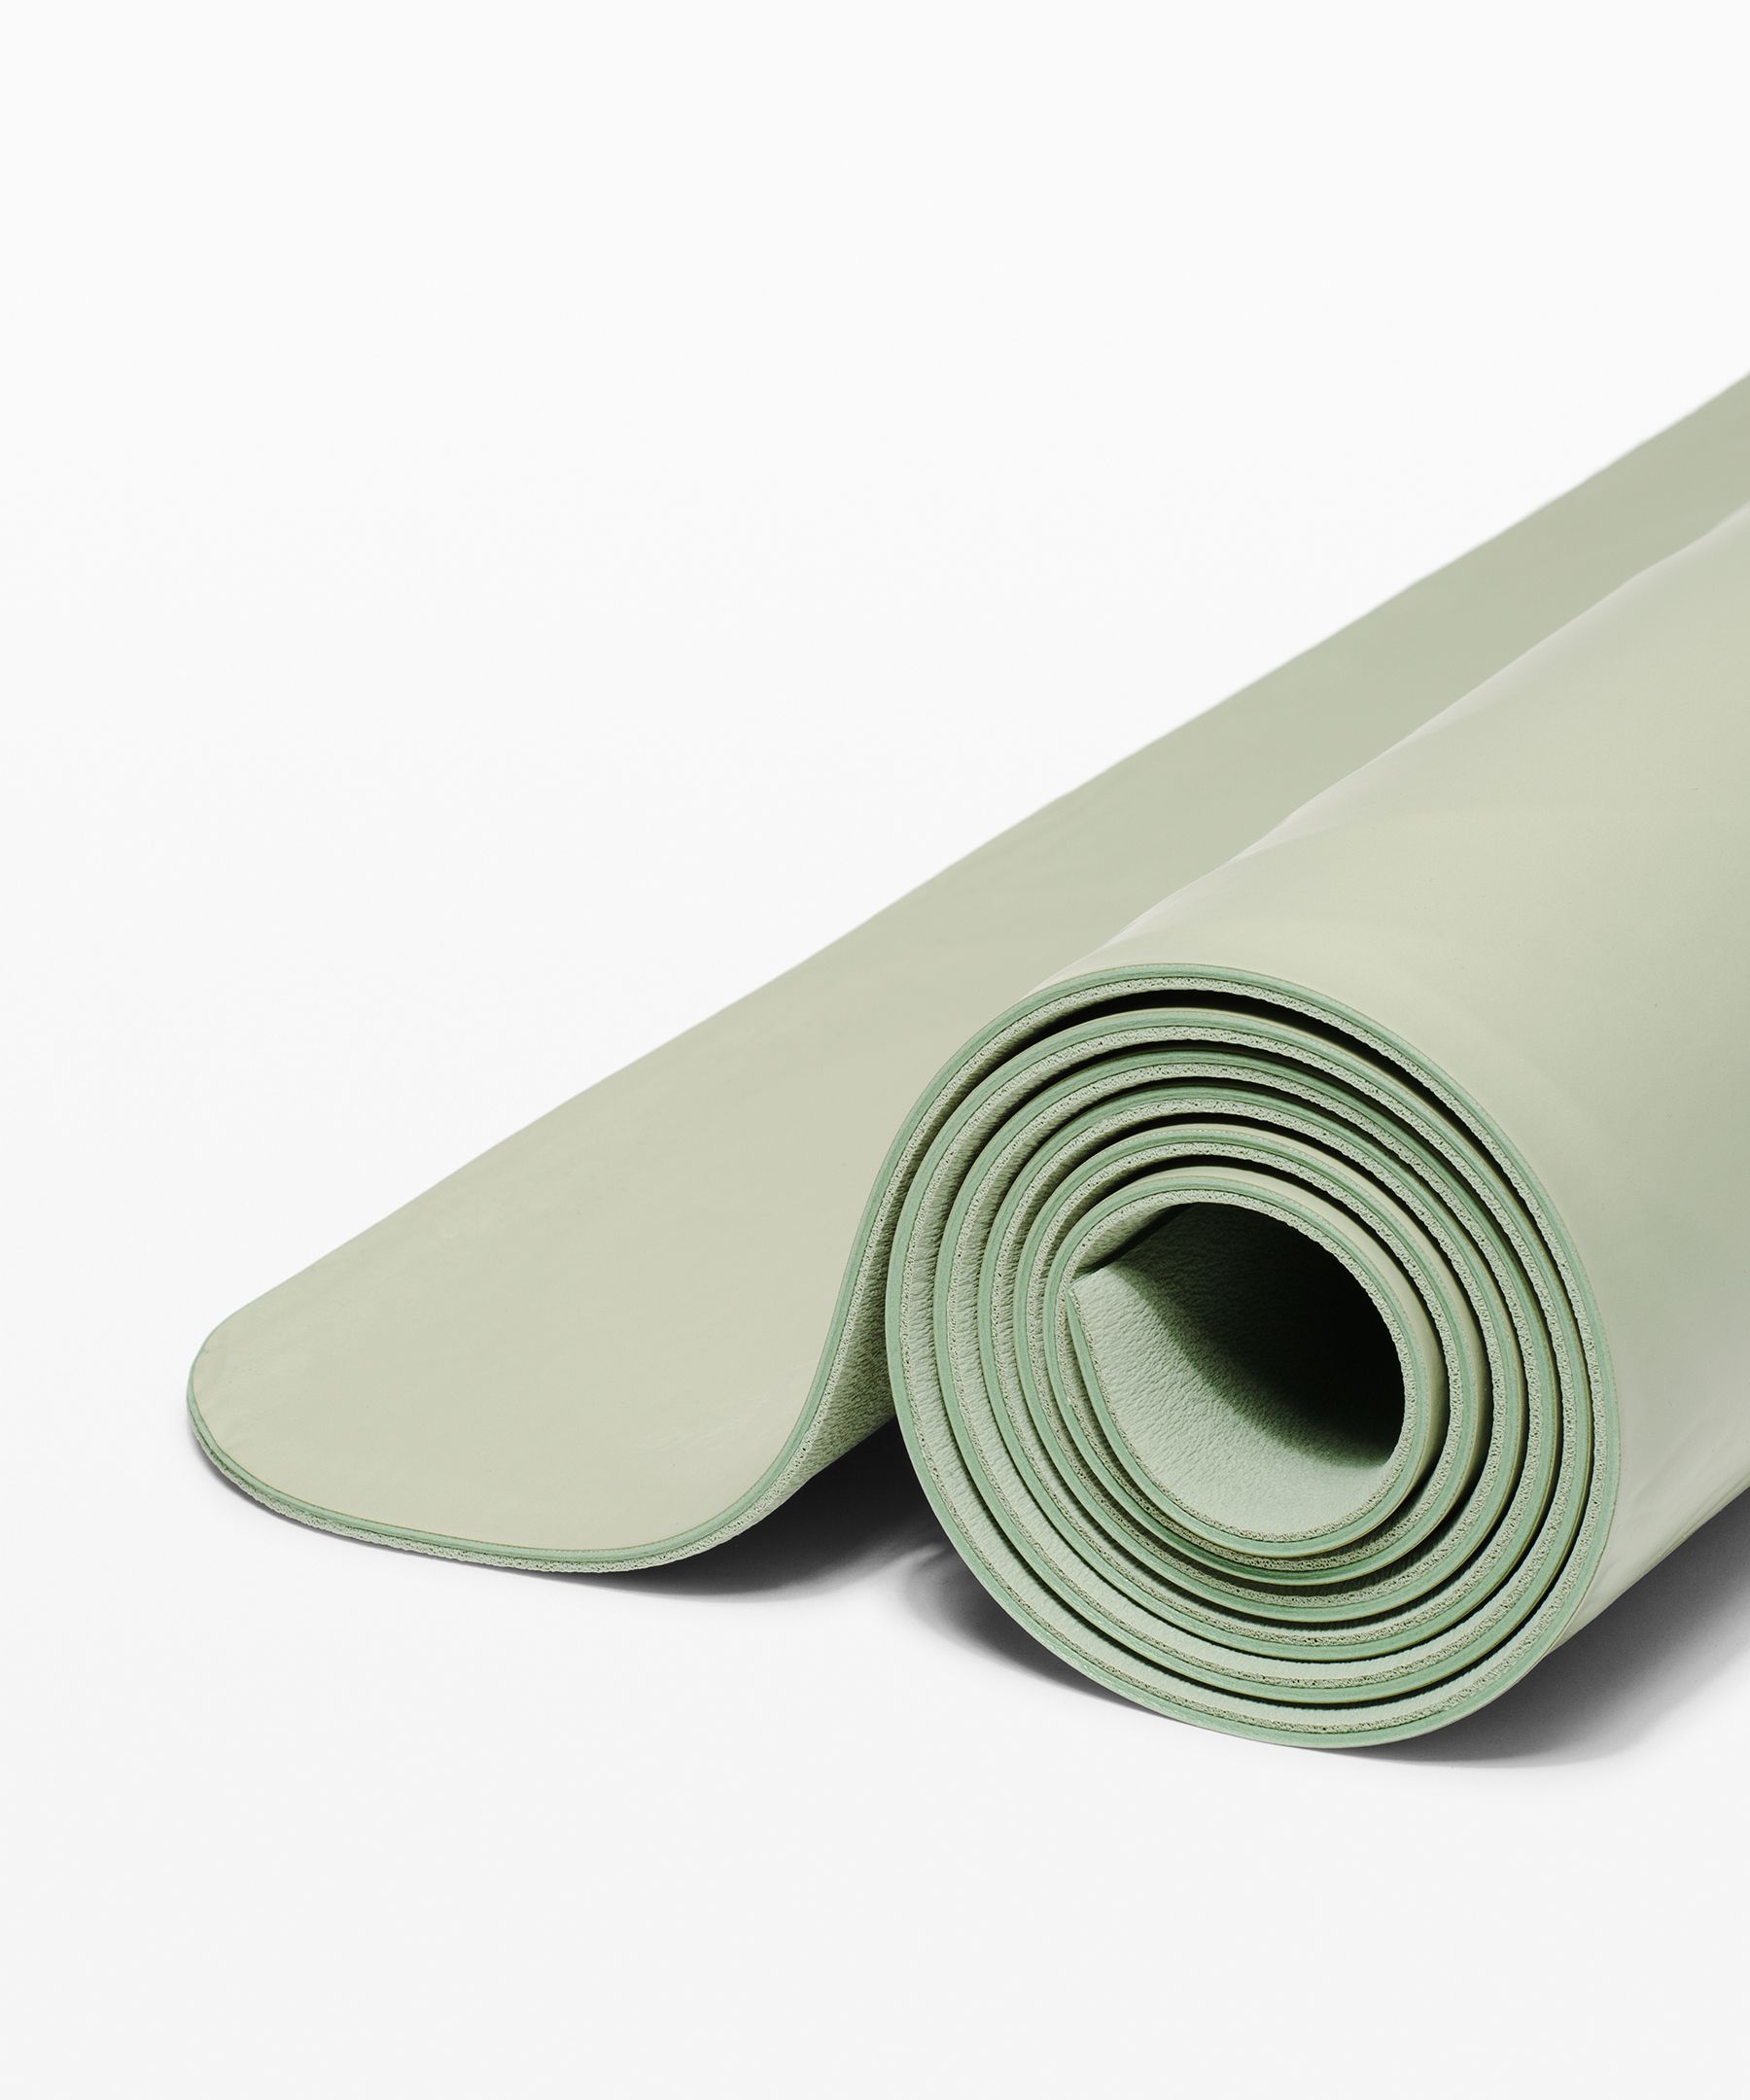 Feel your Practice: lululemon Launches the Take Form Yoga Mat